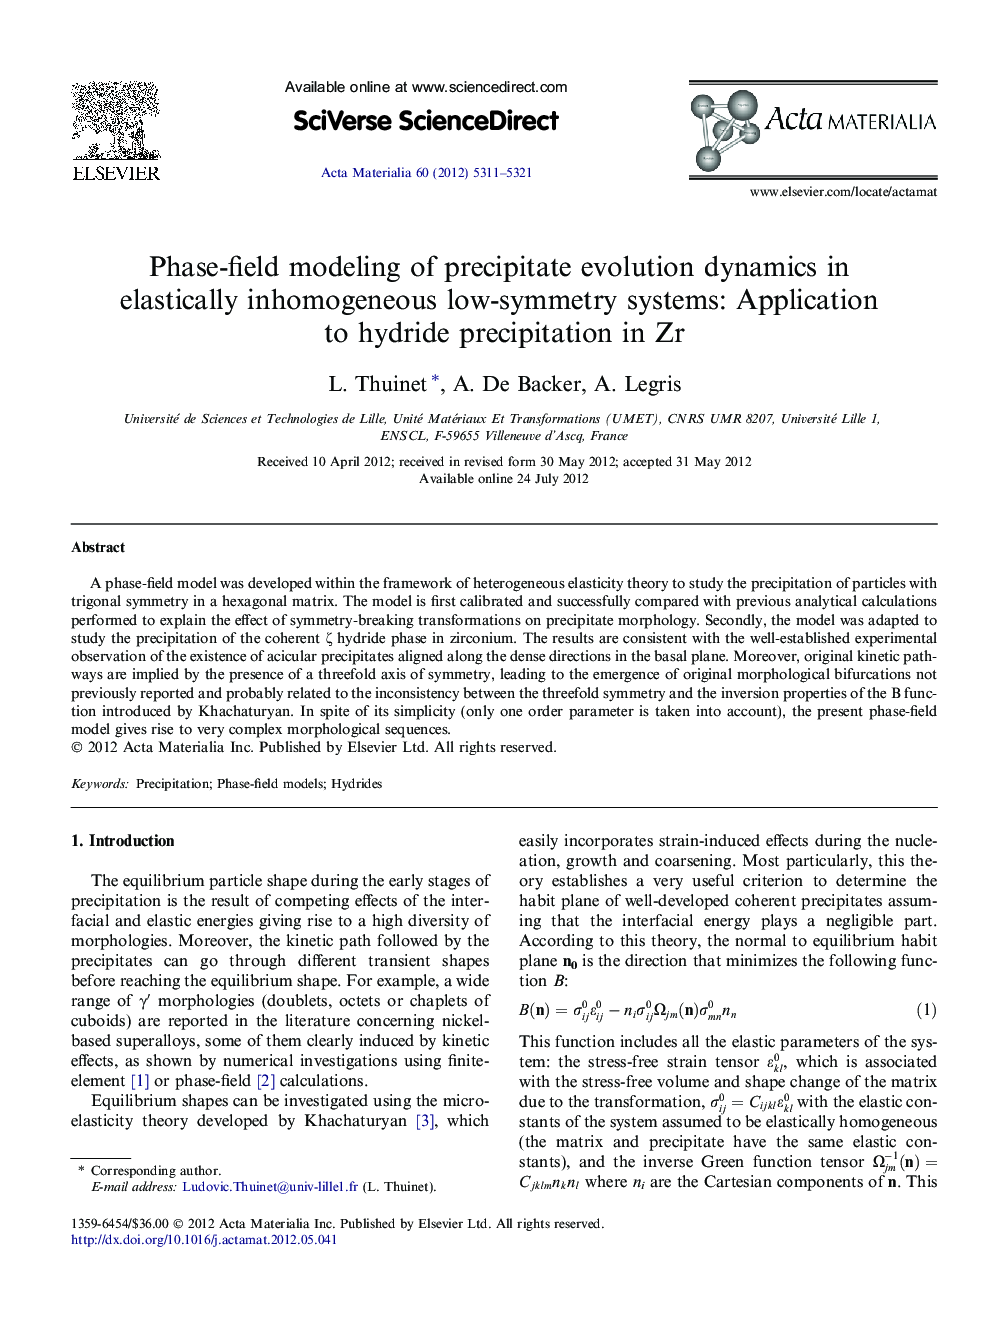 Phase-field modeling of precipitate evolution dynamics in elastically inhomogeneous low-symmetry systems: Application to hydride precipitation in Zr